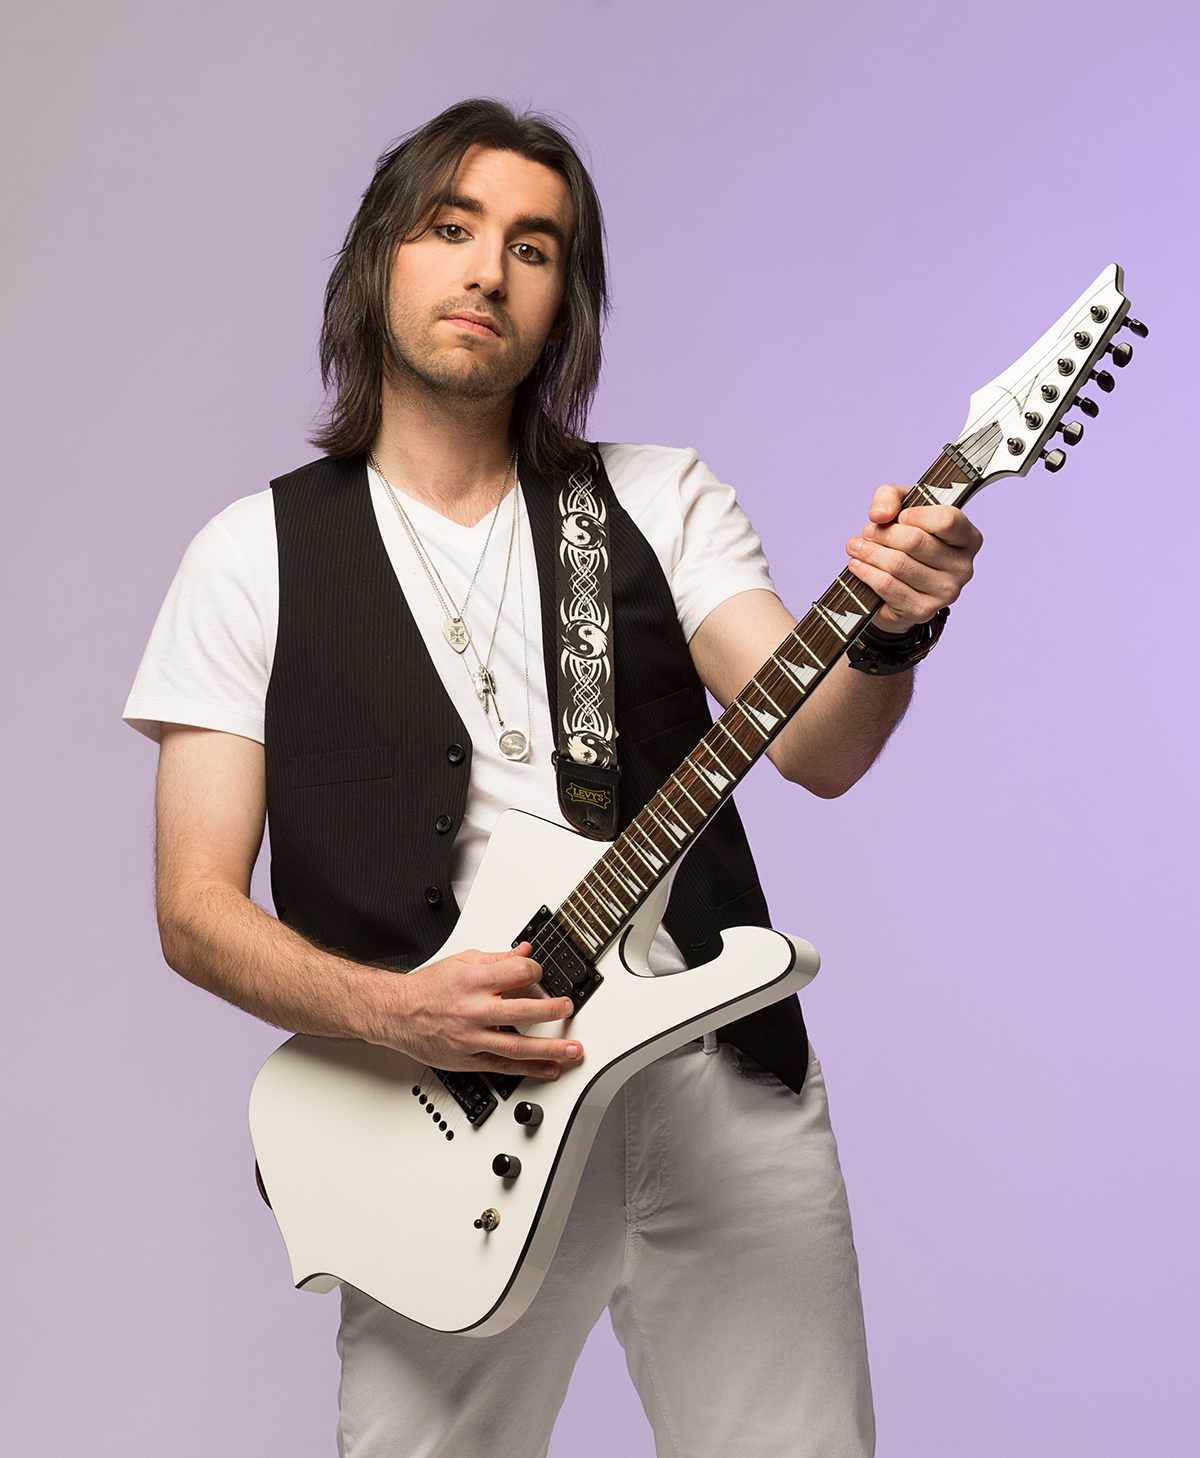 Peter Tentindo - Professional - With Guitar